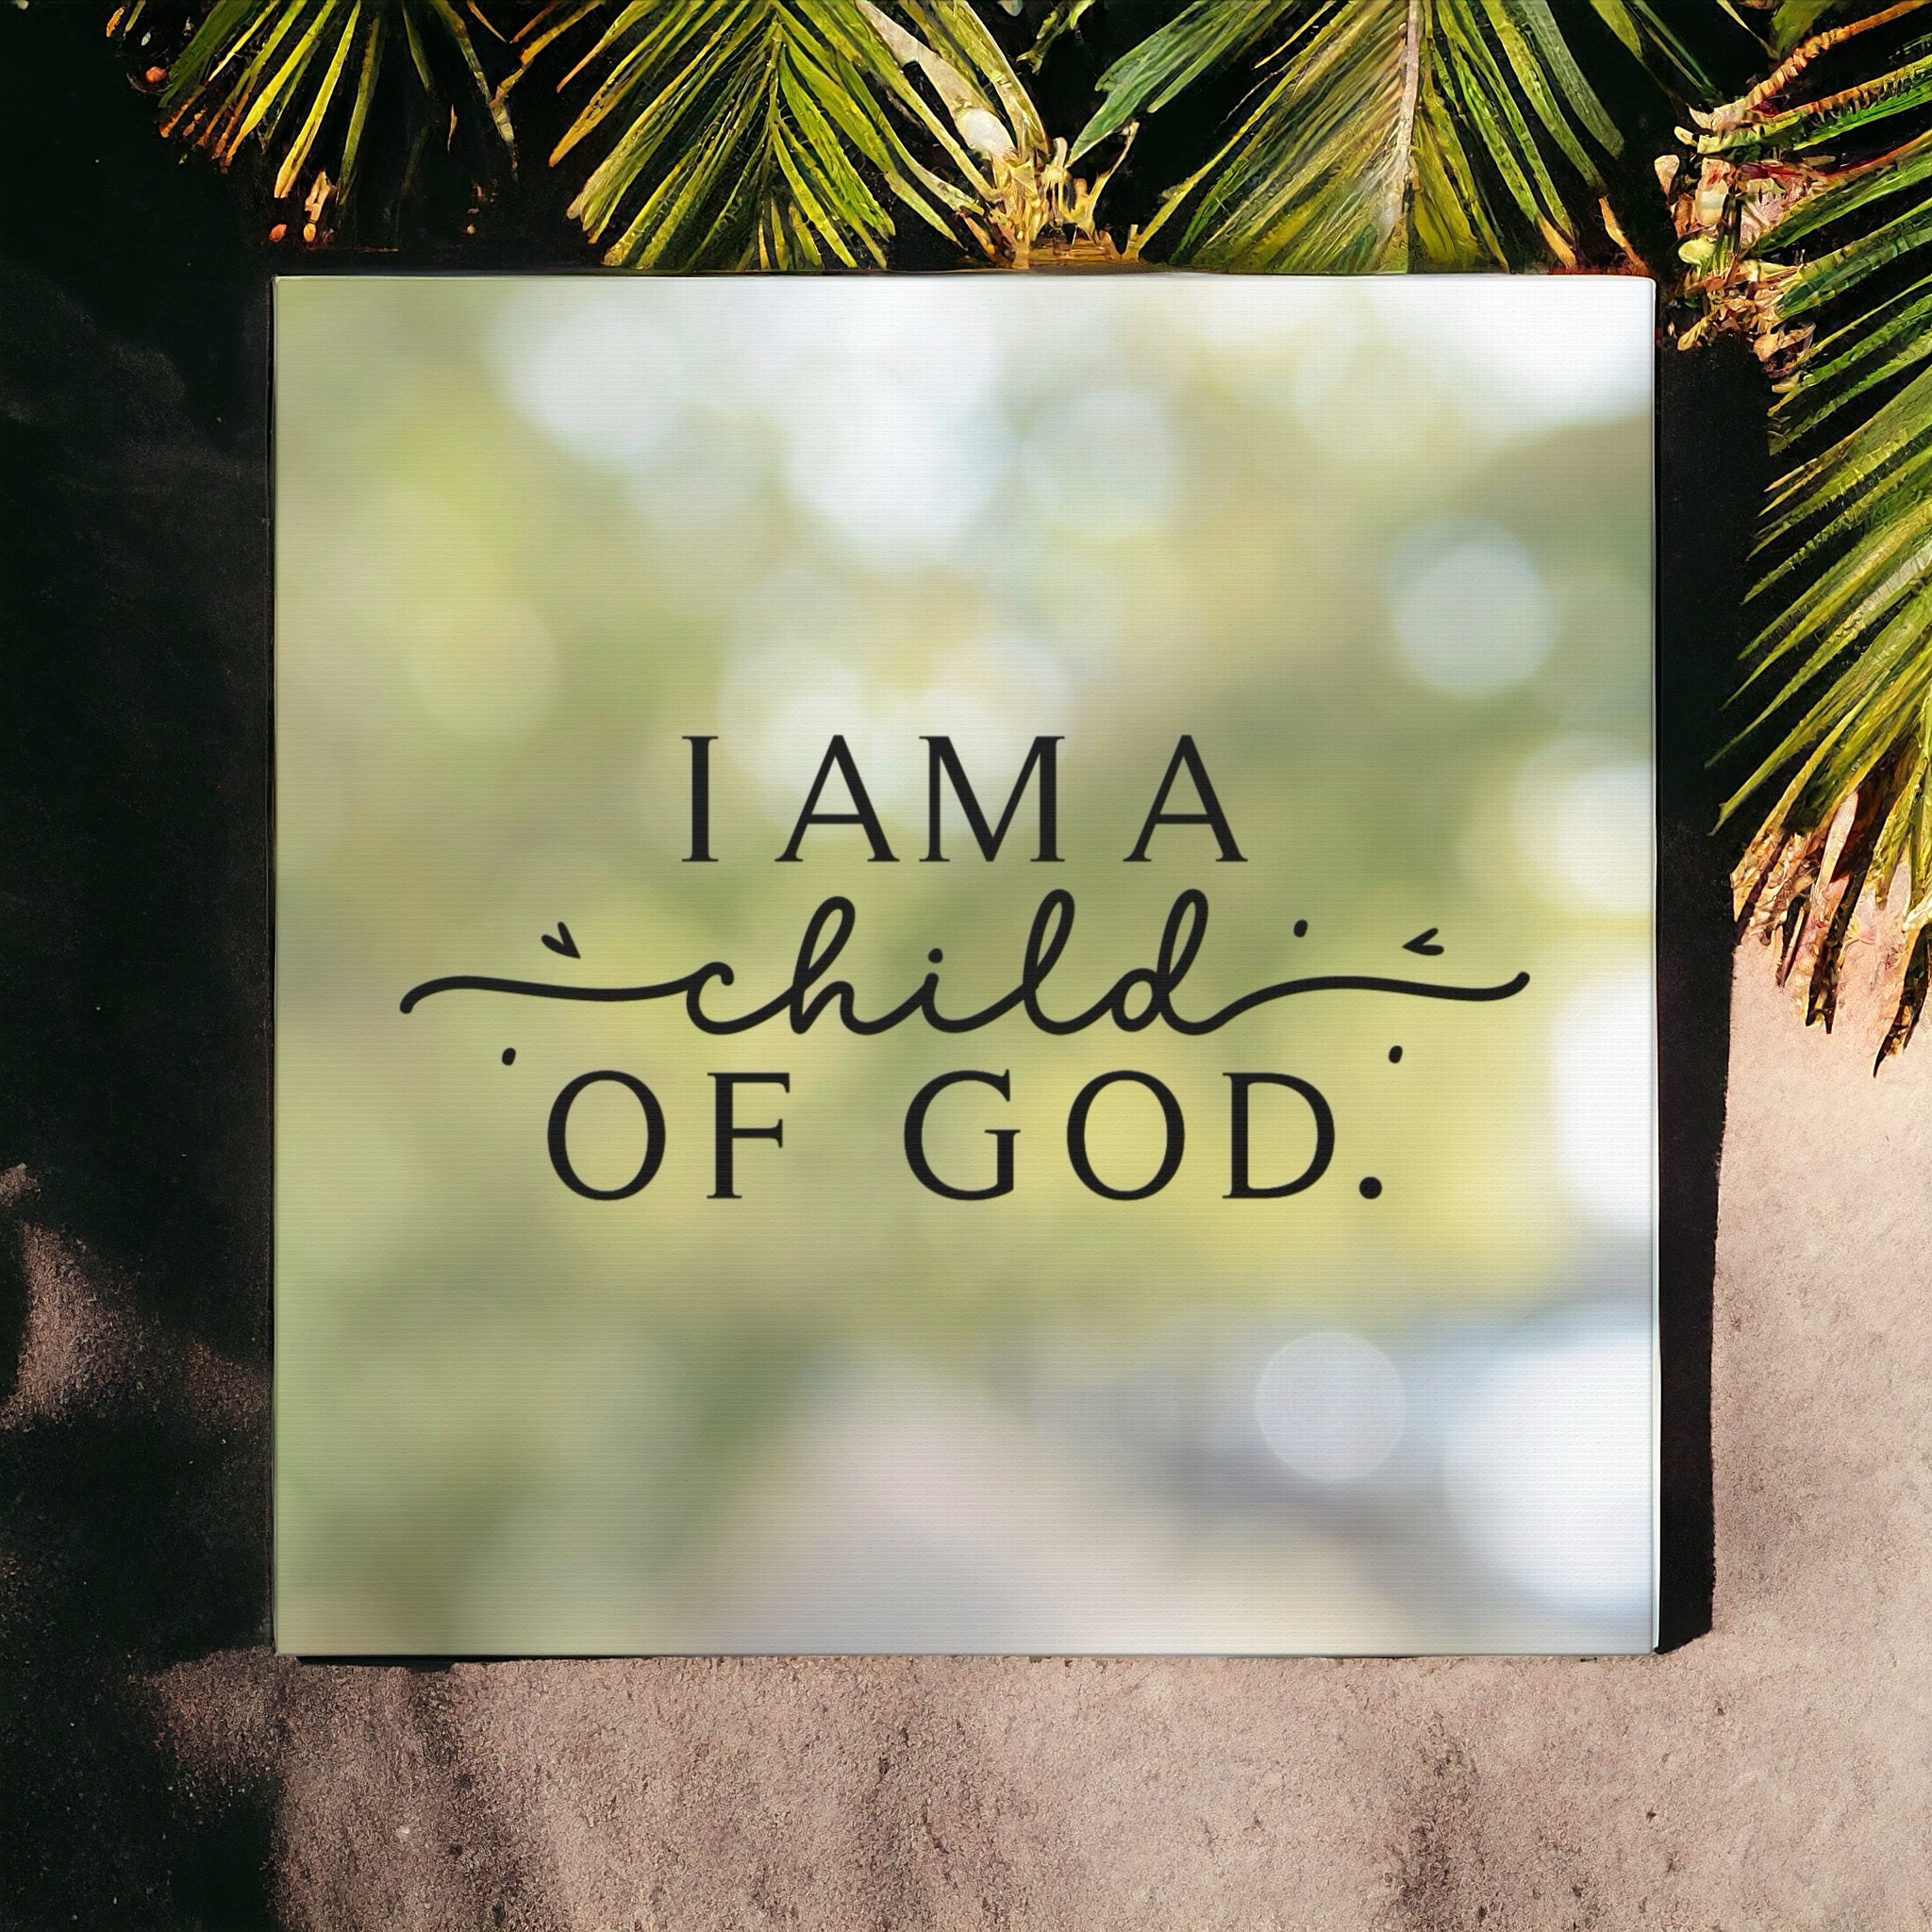 Faith-Filled Decor: Top Christian Wall Art to Uplift Your Home